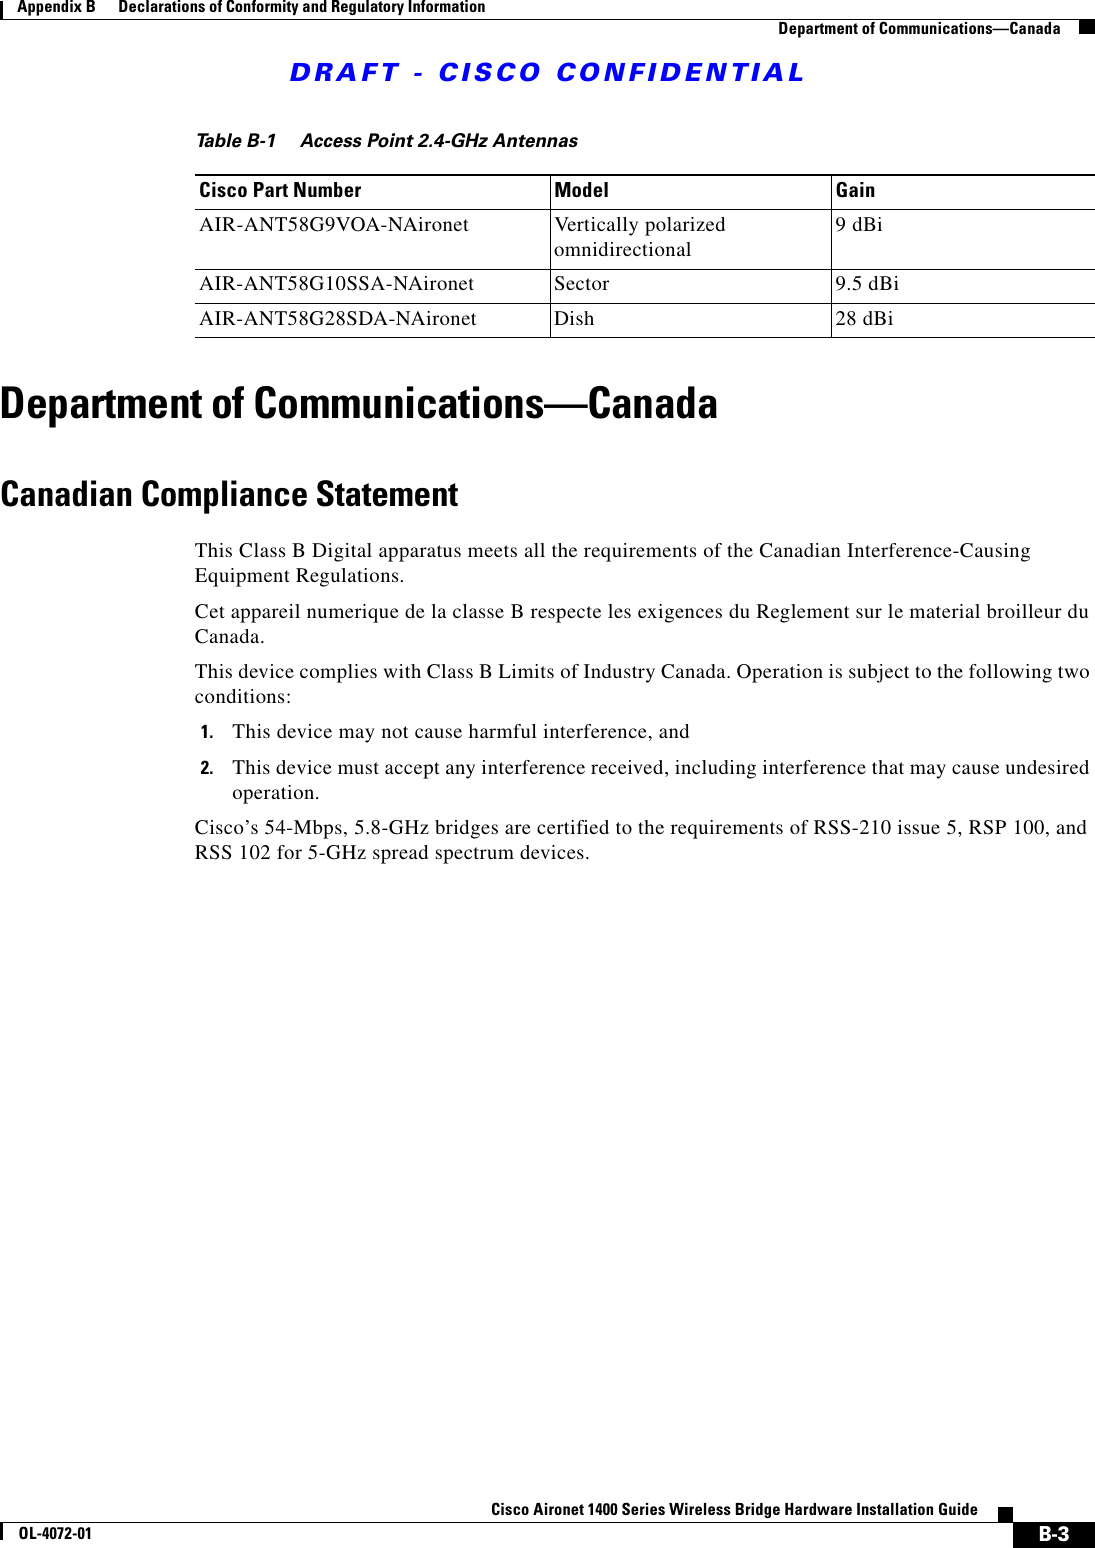 DRAFT - CISCO CONFIDENTIALB-3Cisco Aironet 1400 Series Wireless Bridge Hardware Installation GuideOL-4072-01Appendix B      Declarations of Conformity and Regulatory InformationDepartment of Communications—CanadaDepartment of Communications—CanadaCanadian Compliance StatementThis Class B Digital apparatus meets all the requirements of the Canadian Interference-Causing Equipment Regulations.Cet appareil numerique de la classe B respecte les exigences du Reglement sur le material broilleur du Canada.This device complies with Class B Limits of Industry Canada. Operation is subject to the following two conditions:1. This device may not cause harmful interference, and2. This device must accept any interference received, including interference that may cause undesired operation.Cisco’s 54-Mbps, 5.8-GHz bridges are certified to the requirements of RSS-210 issue 5, RSP 100, andRSS 102 for 5-GHz spread spectrum devices.Table B-1 Access Point 2.4-GHz AntennasCisco Part Number Model GainAIR-ANT58G9VOA-NAironet Vertically polarized omnidirectional  9 dBiAIR-ANT58G10SSA-NAironet Sector 9.5 dBiAIR-ANT58G28SDA-NAironet Dish 28 dBi